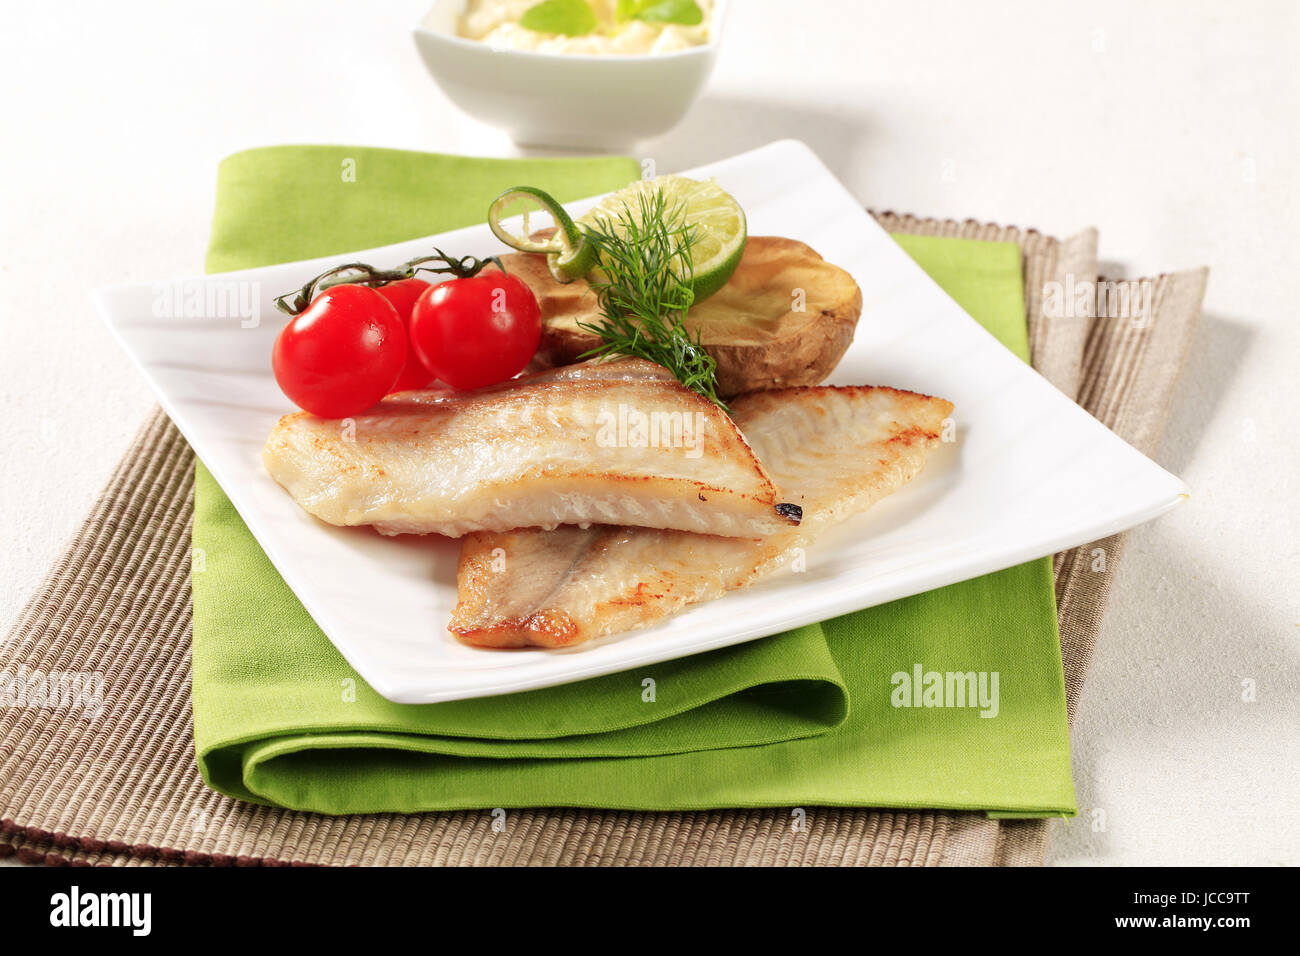 Pan fried fish fillets with roasted potato Stock Photo